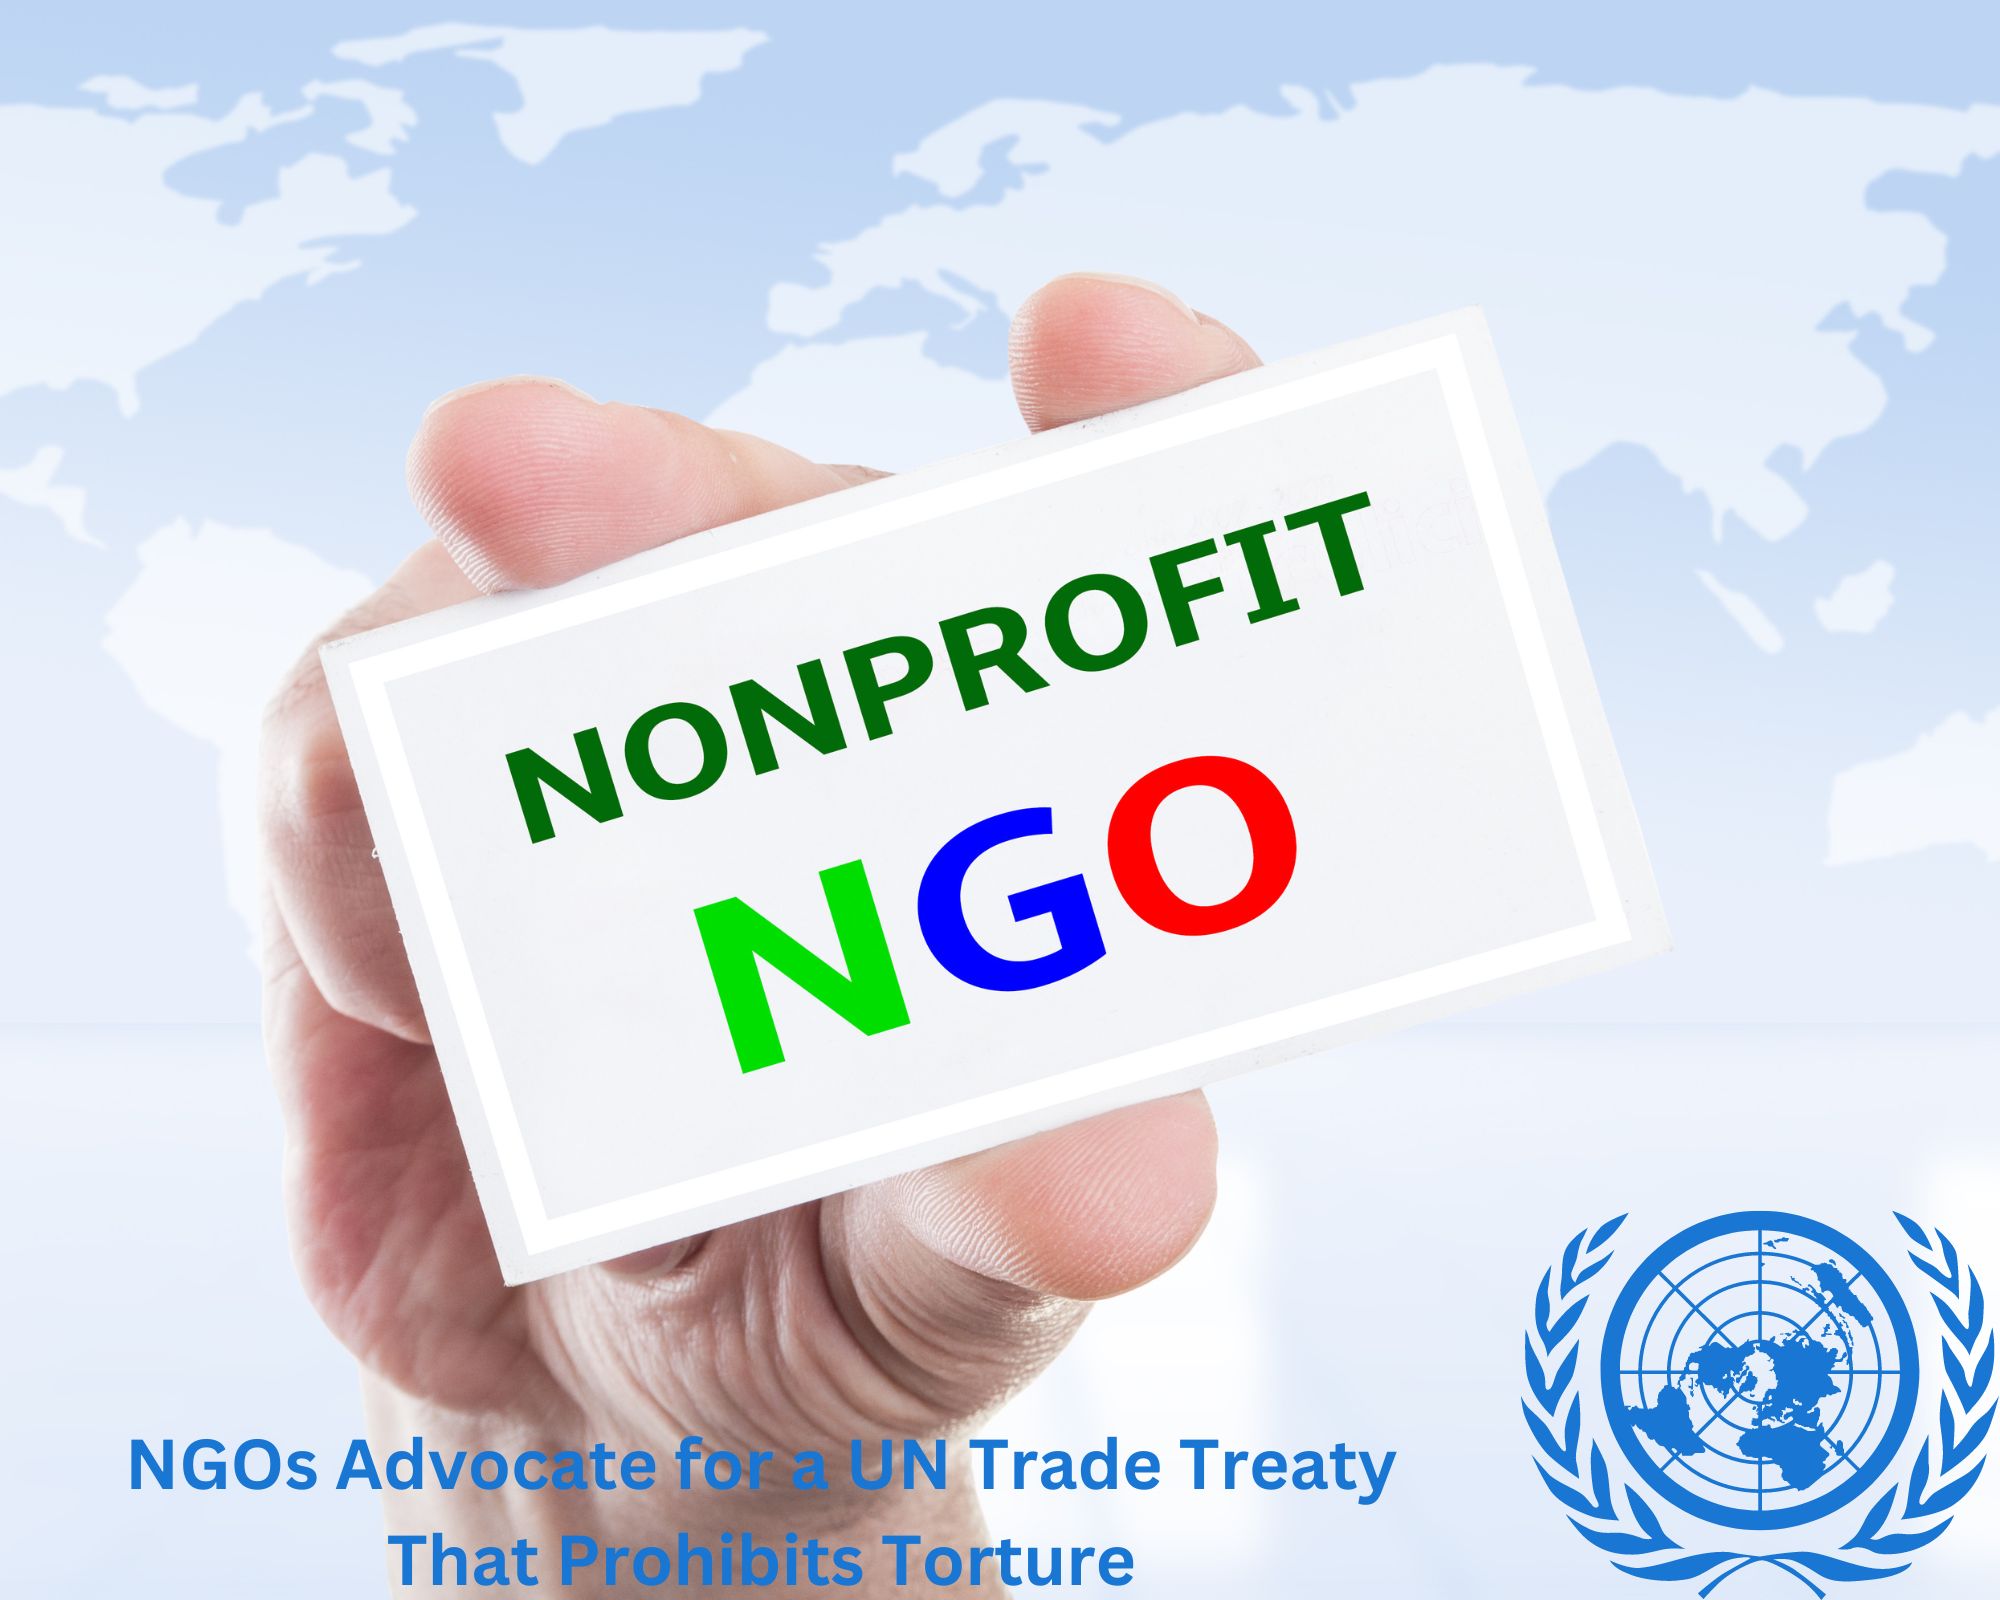 NGOs Advocate for a UN Trade Treaty That Prohibits Torture